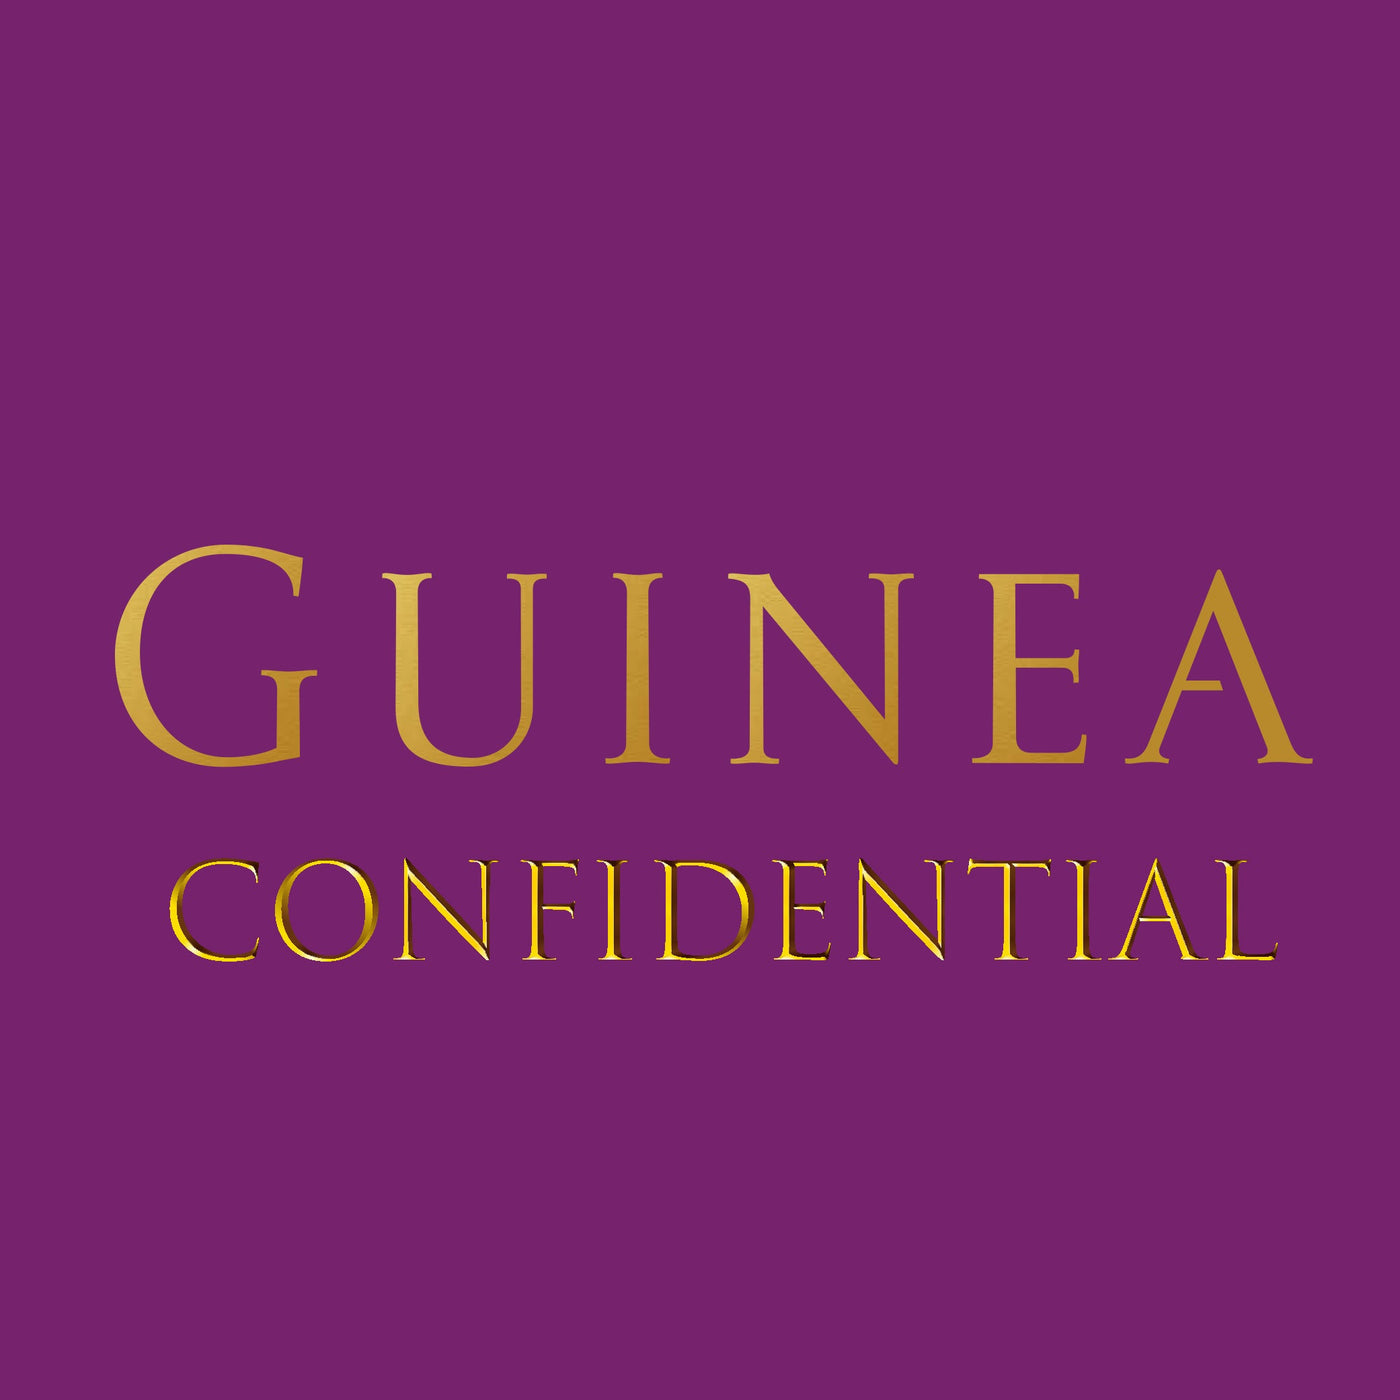 Gold Guinea Confidential lettering on a purple background